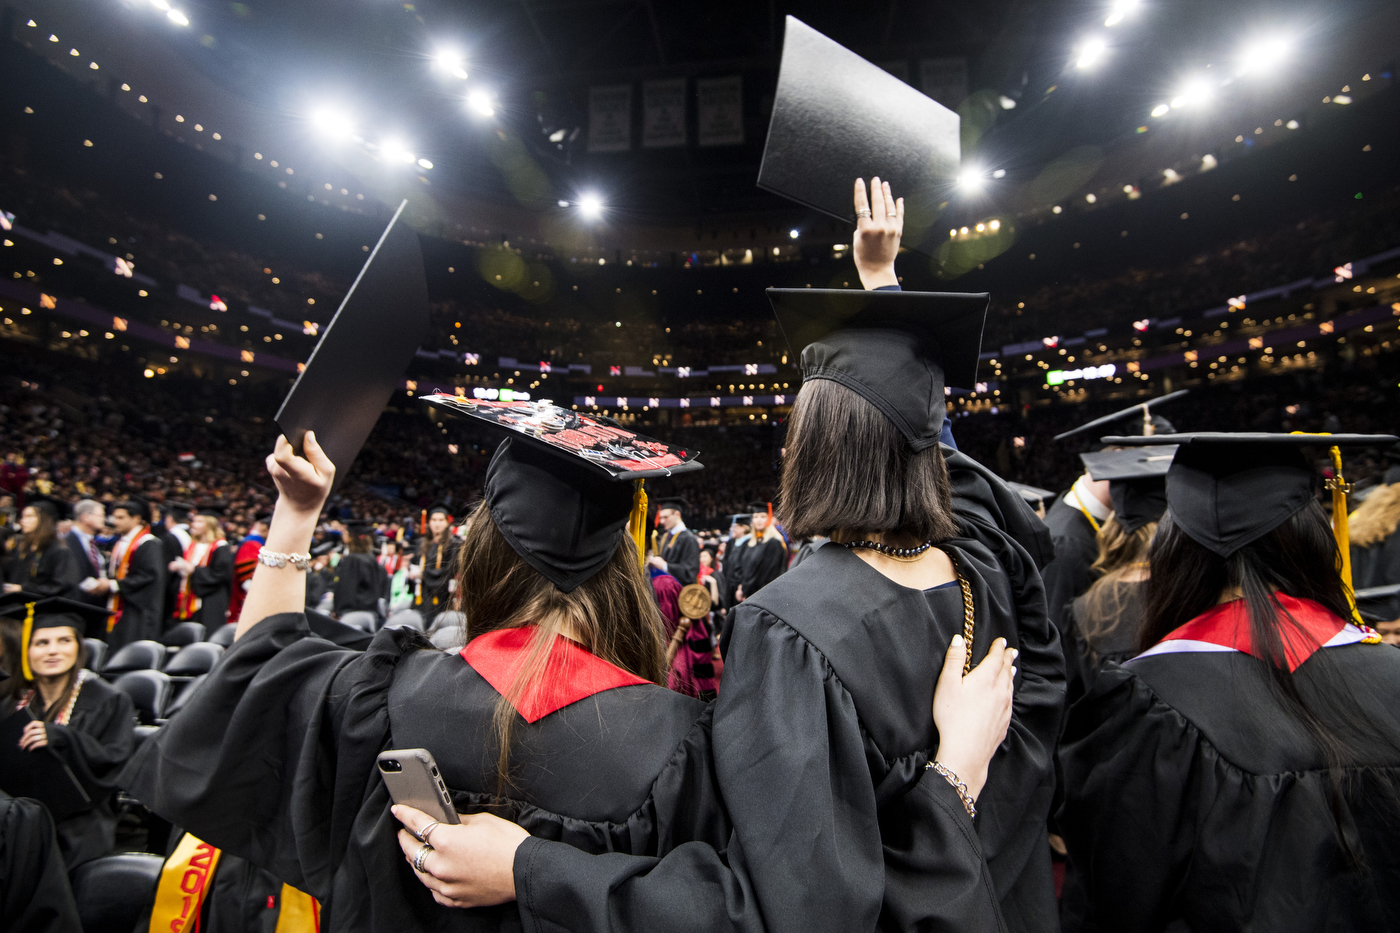 More than 4,000 students received diplomas at Commencement, which was held at TD Garden in Boston.